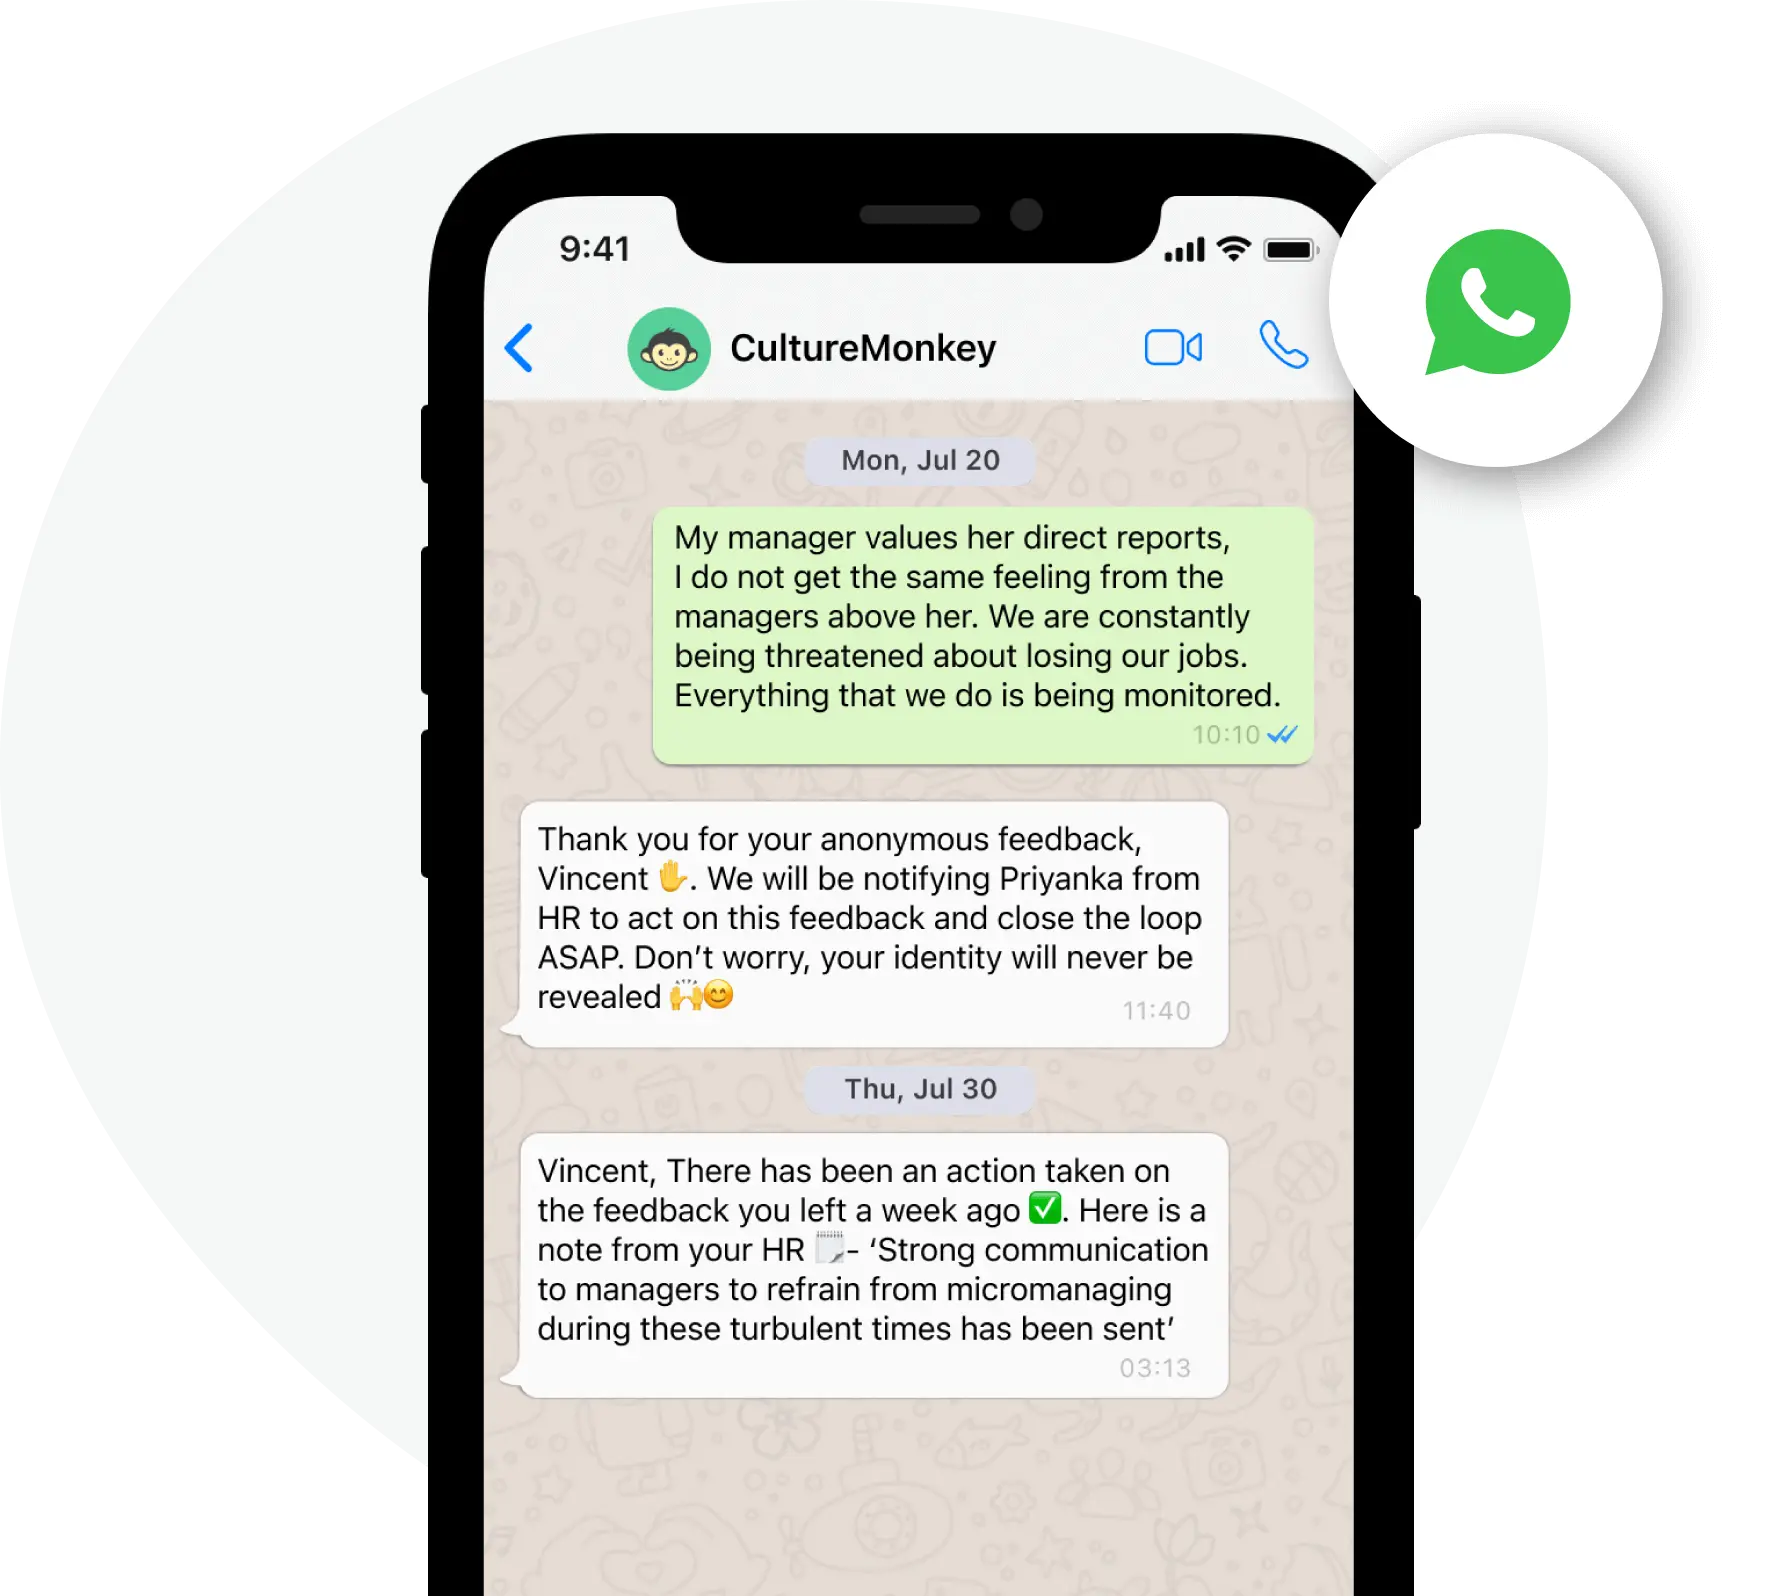 Leverage Whatsapp integration to notify your employees and collect feedback